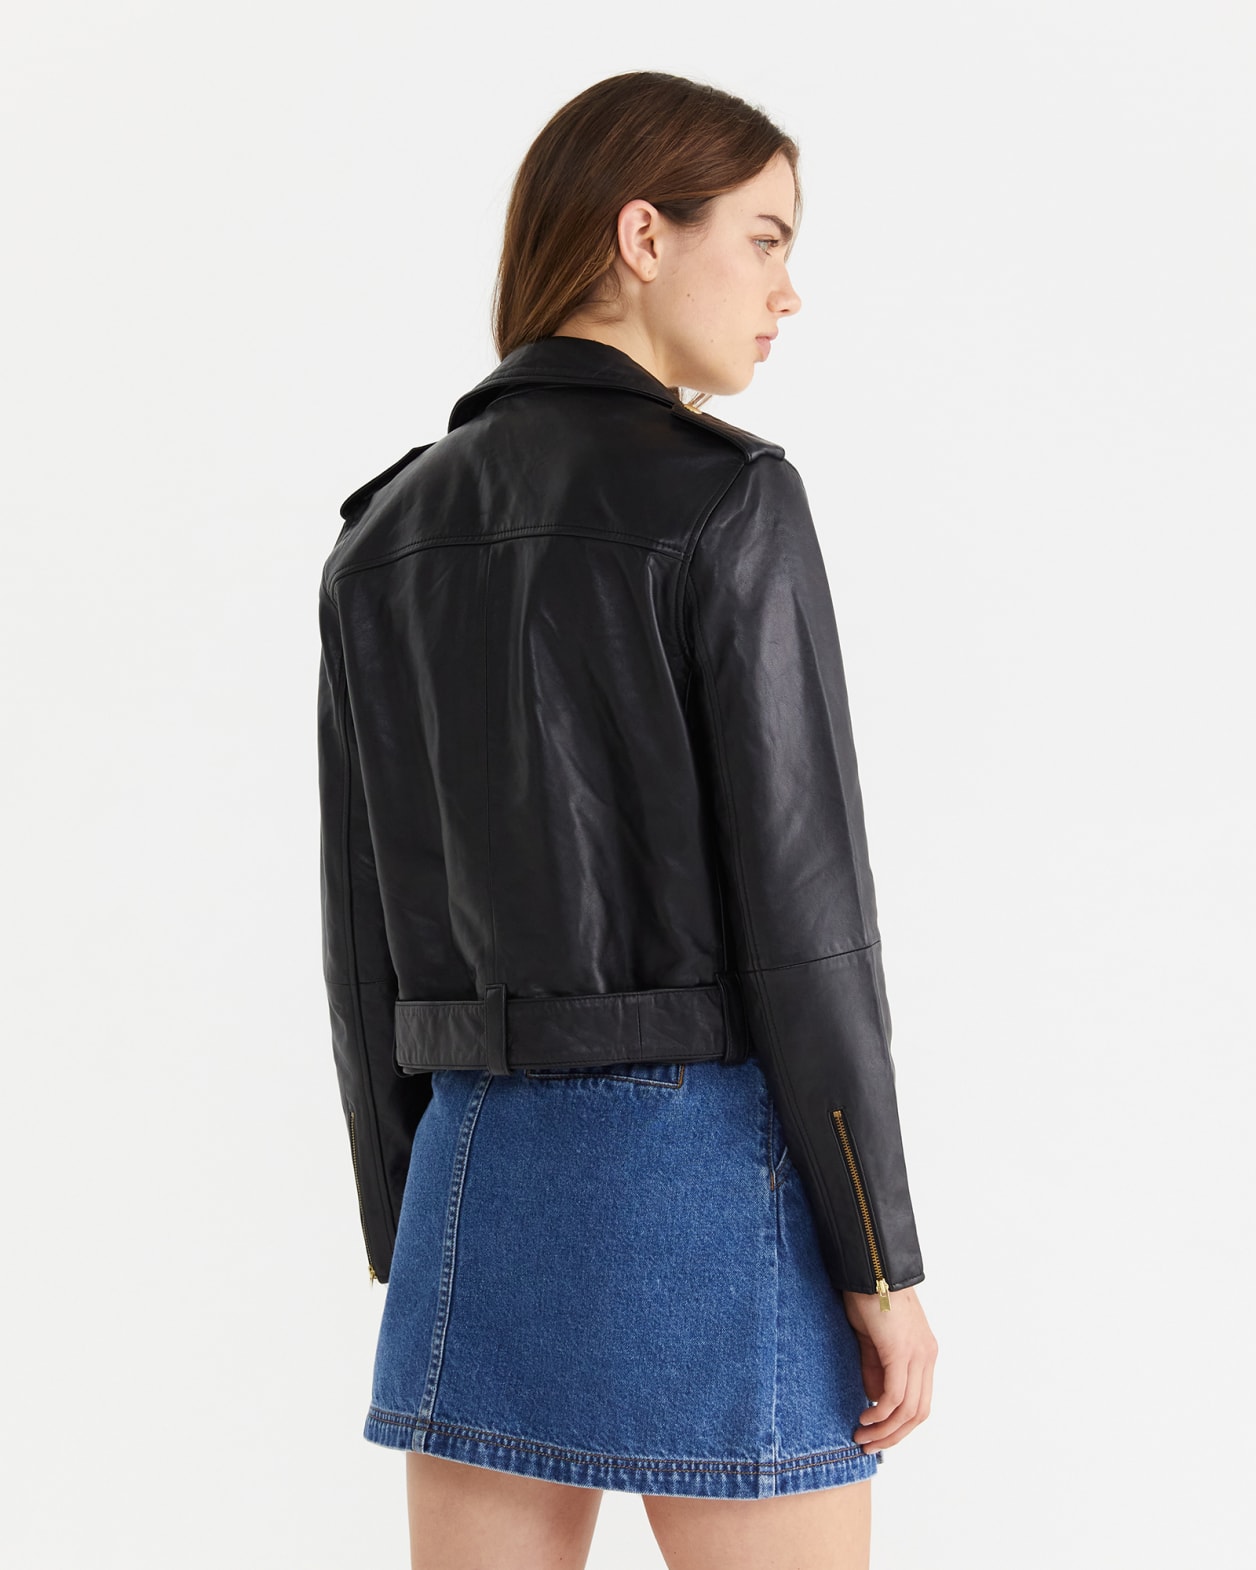 Quintana Leather Jacket in BLACK